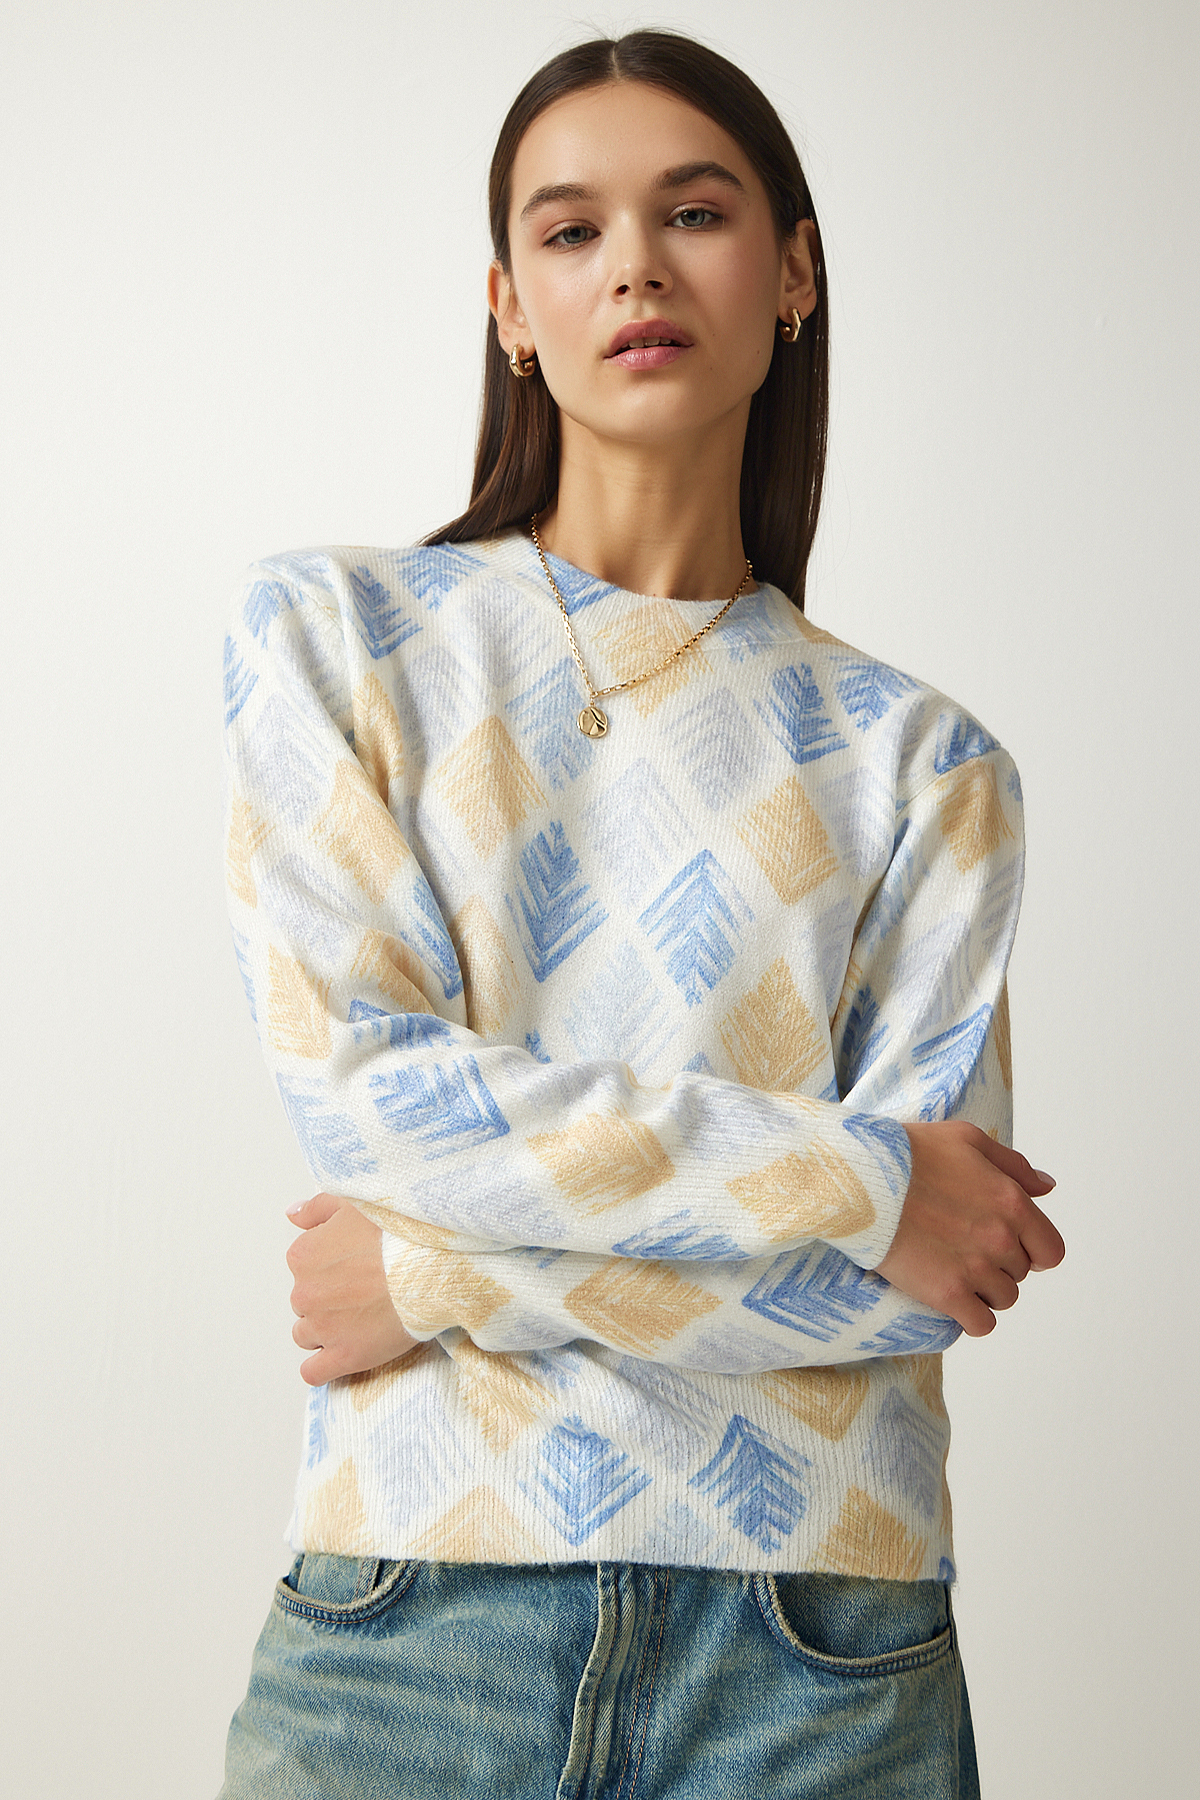 Levně Happiness İstanbul Women's Yellow Blue Patterned Soft Textured Knitwear Sweater